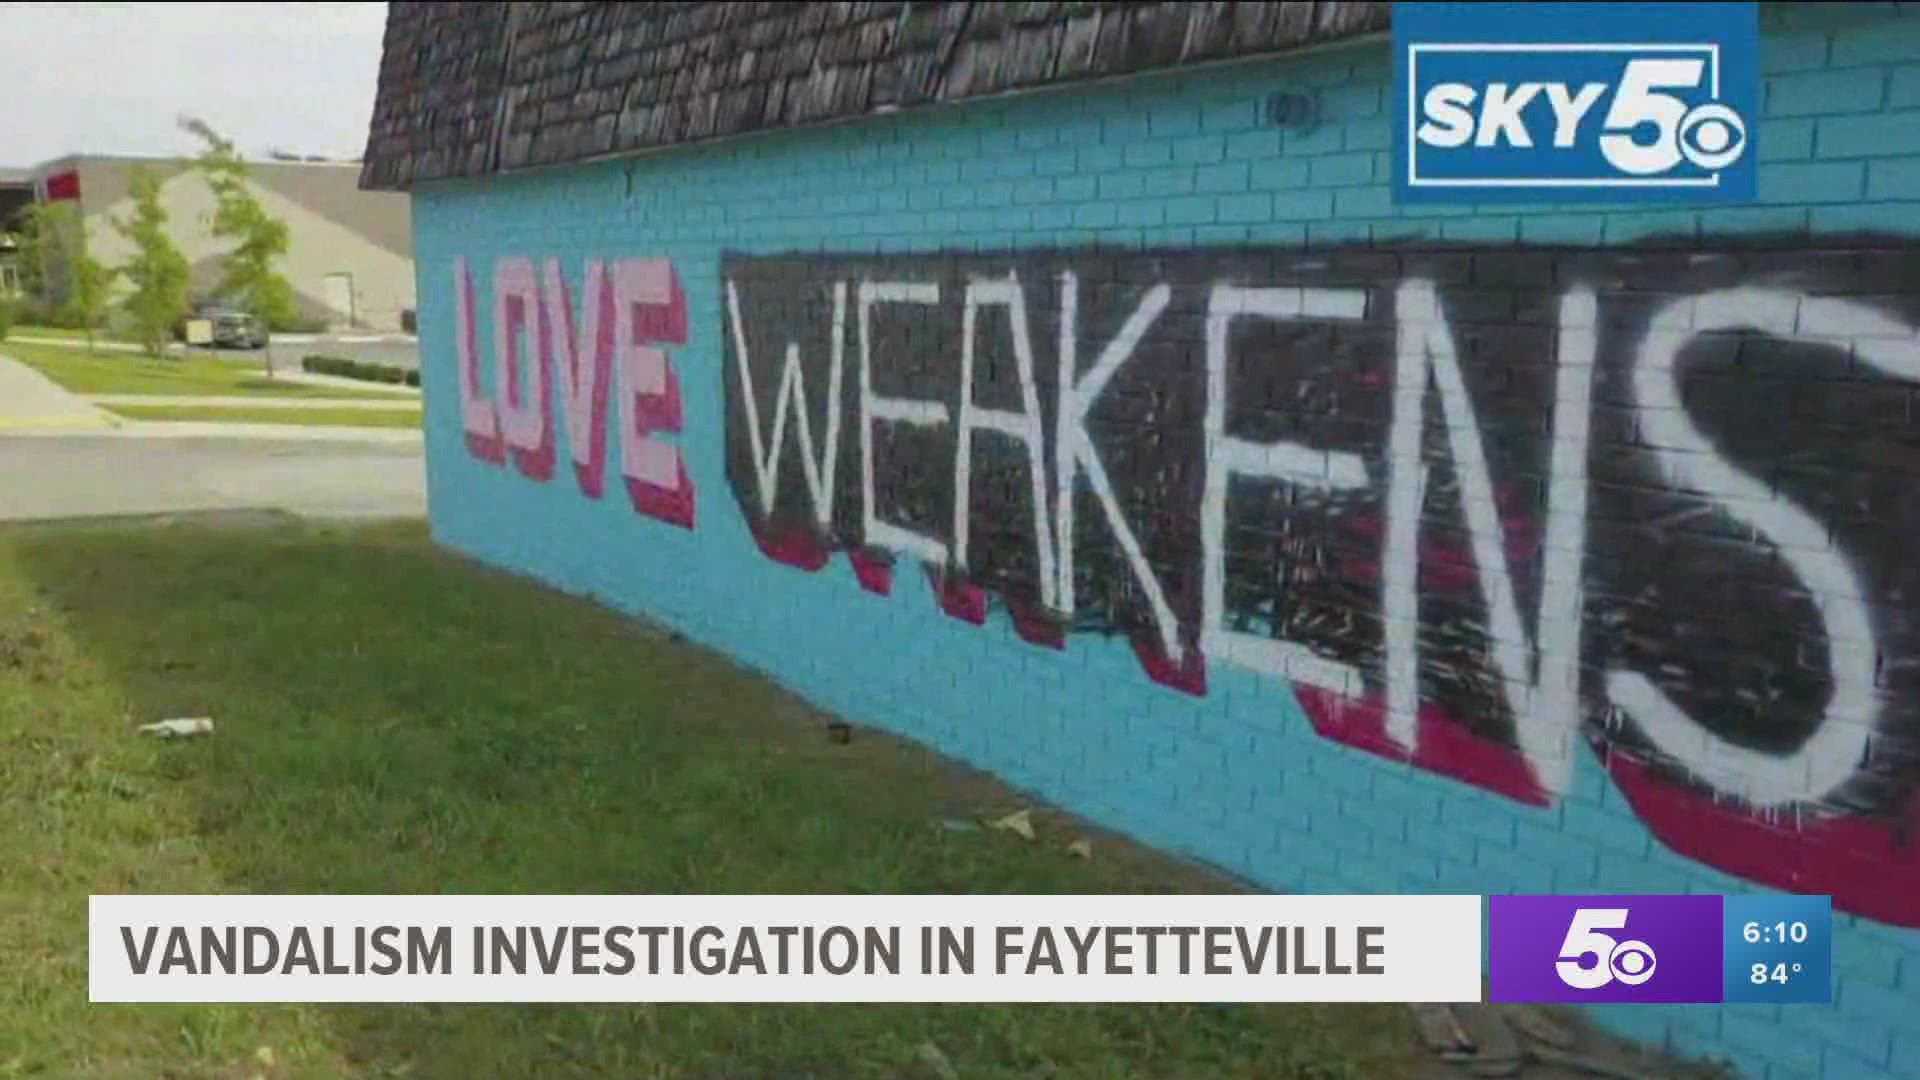 A message of unity in Fayetteville was vandalized overnight, and a white supremacy slogan has been placed on the same building. https://bit.ly/3mpQNAr